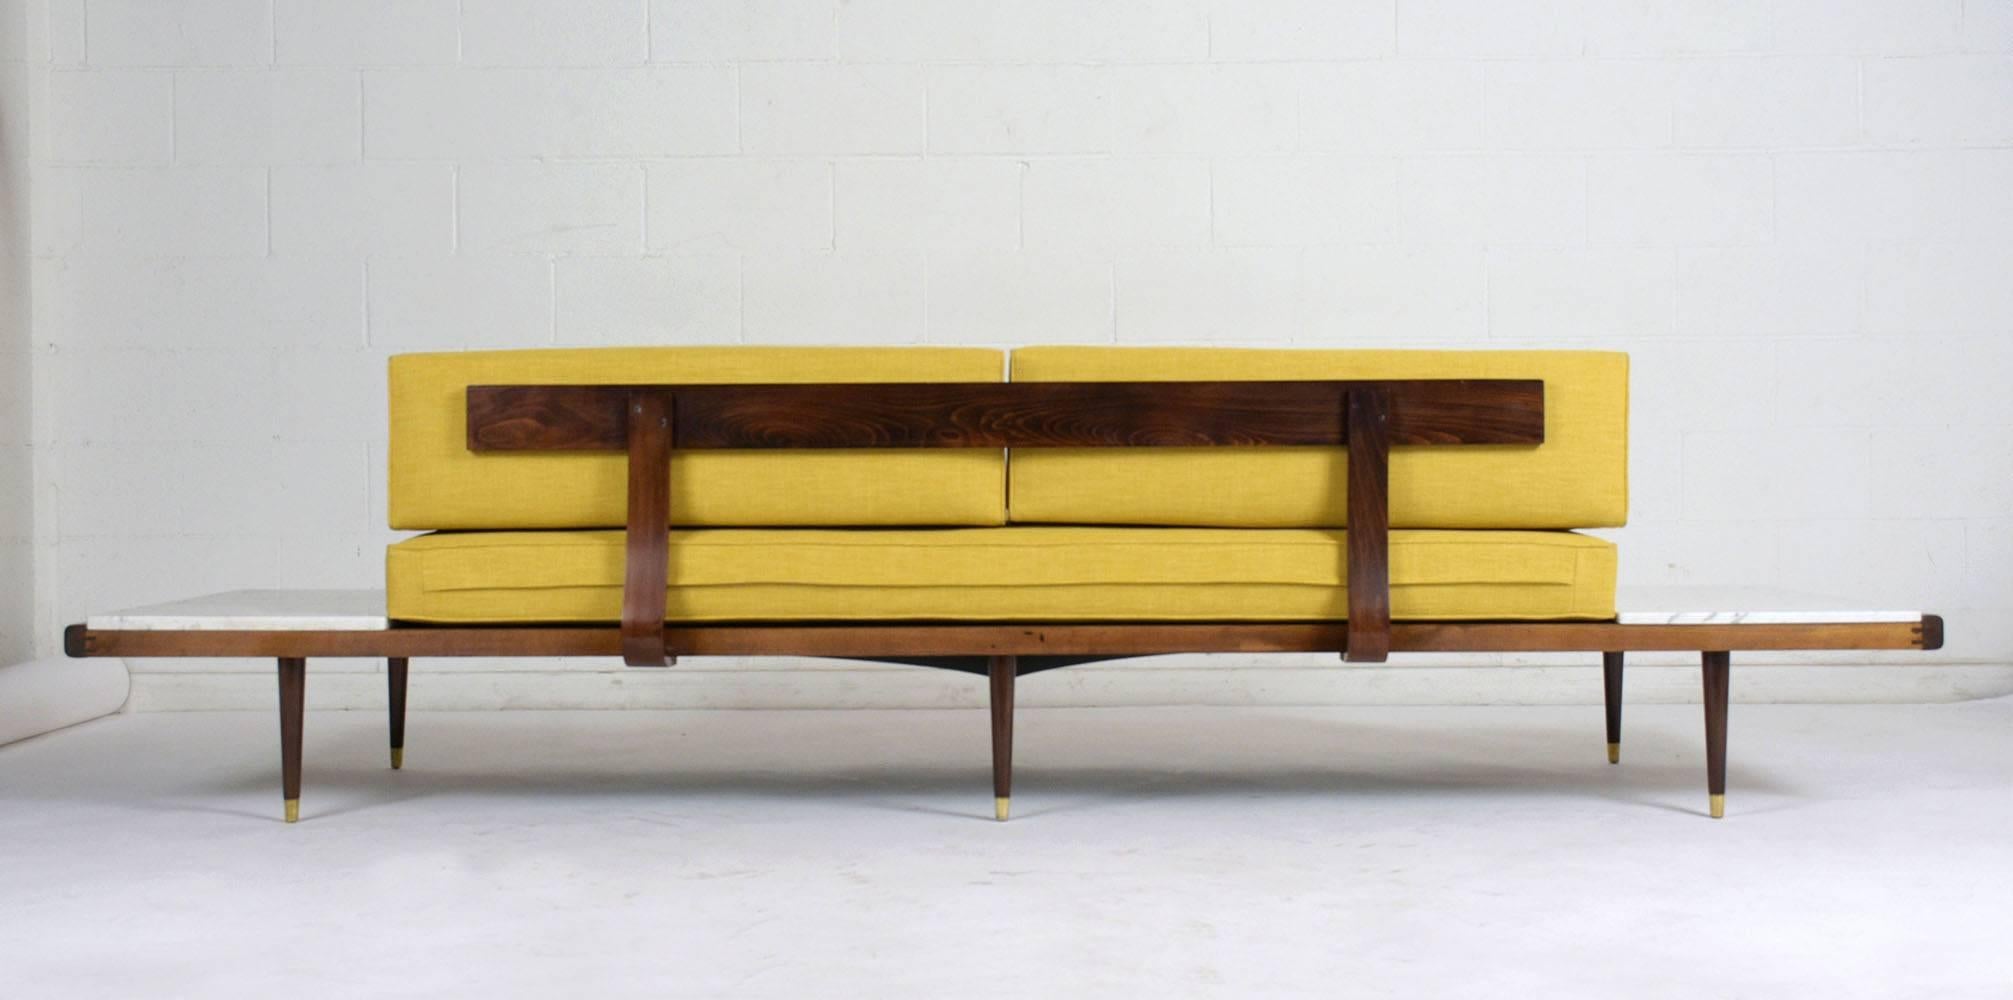 Carved Midcentury Adrian Pearsall Sofa with Side Tables